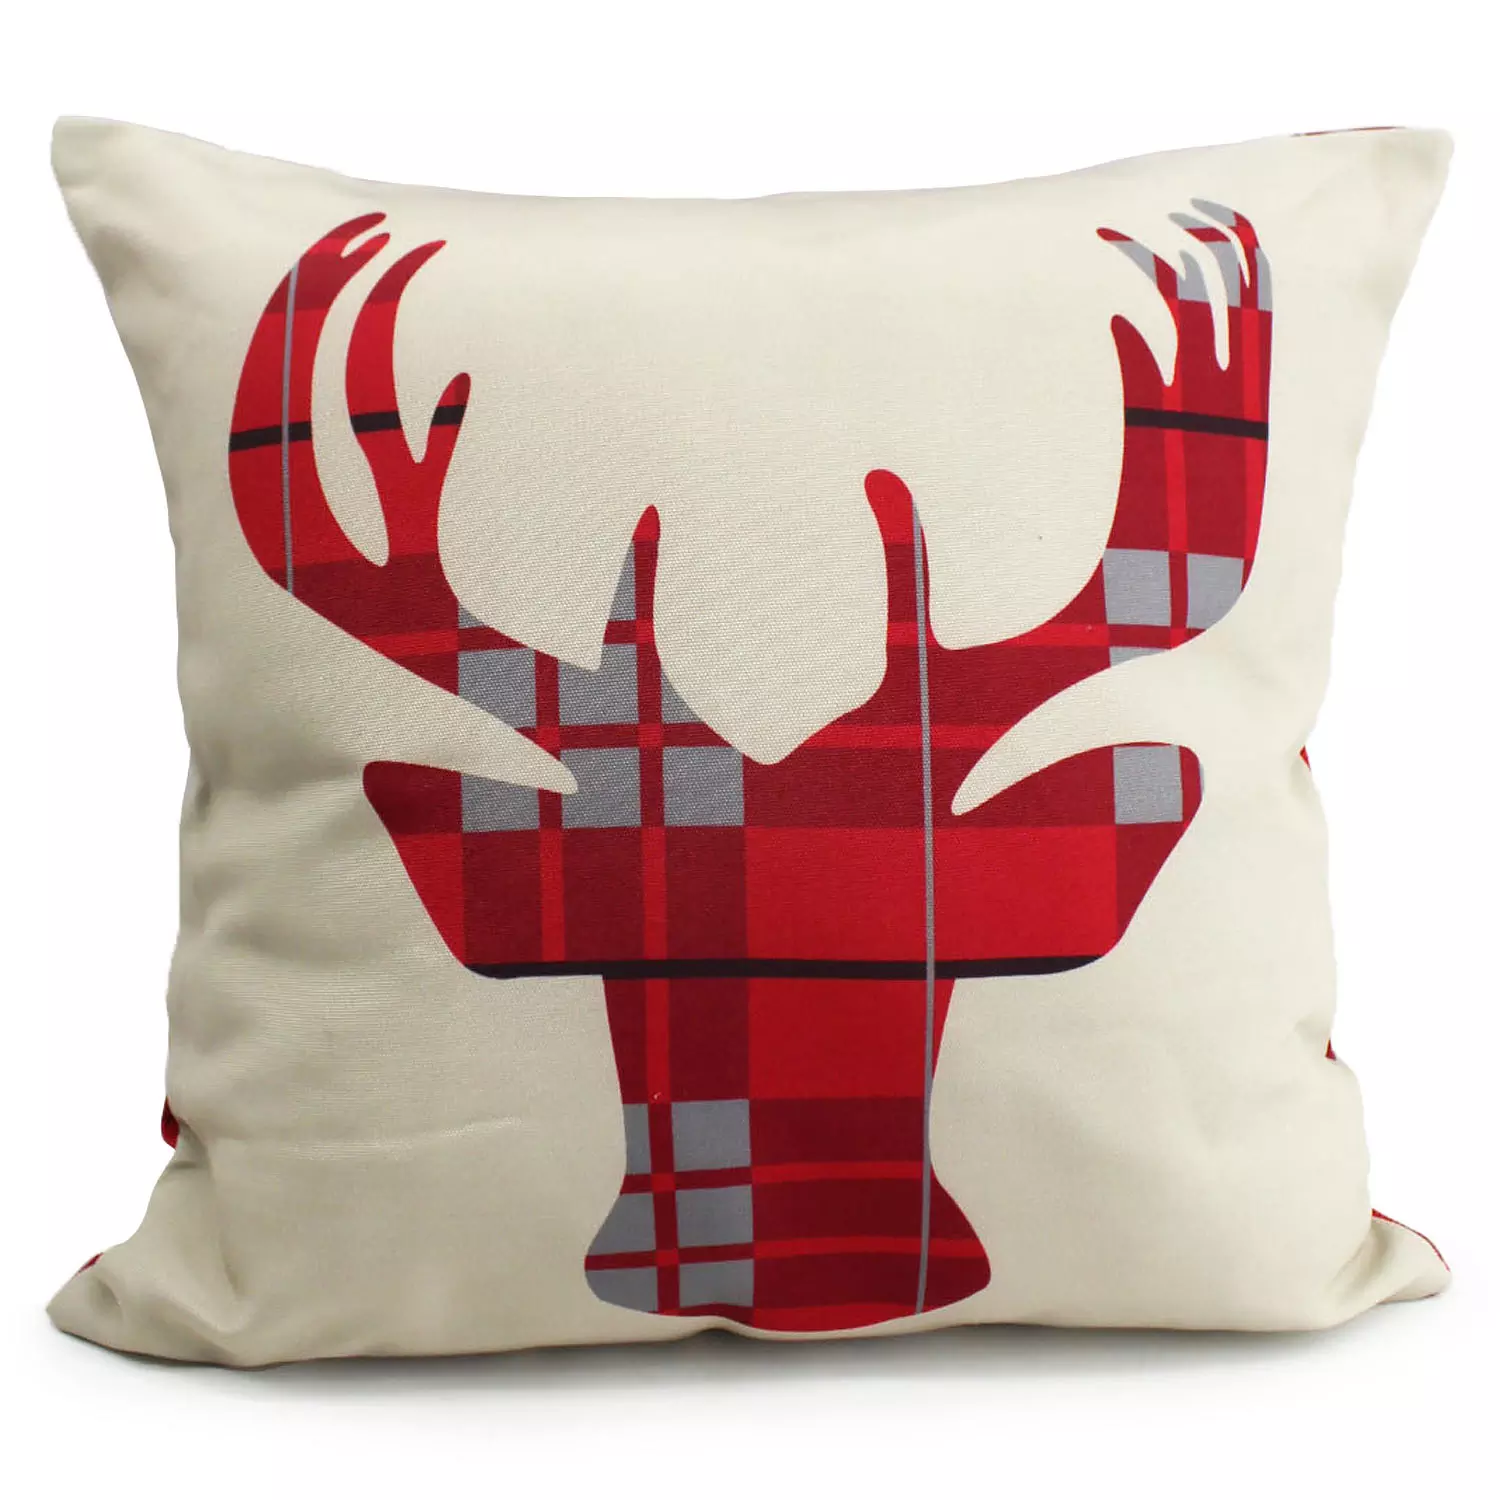 Printed decorative cushion with moose silhouette front and matching plaid back, 18"x18", red